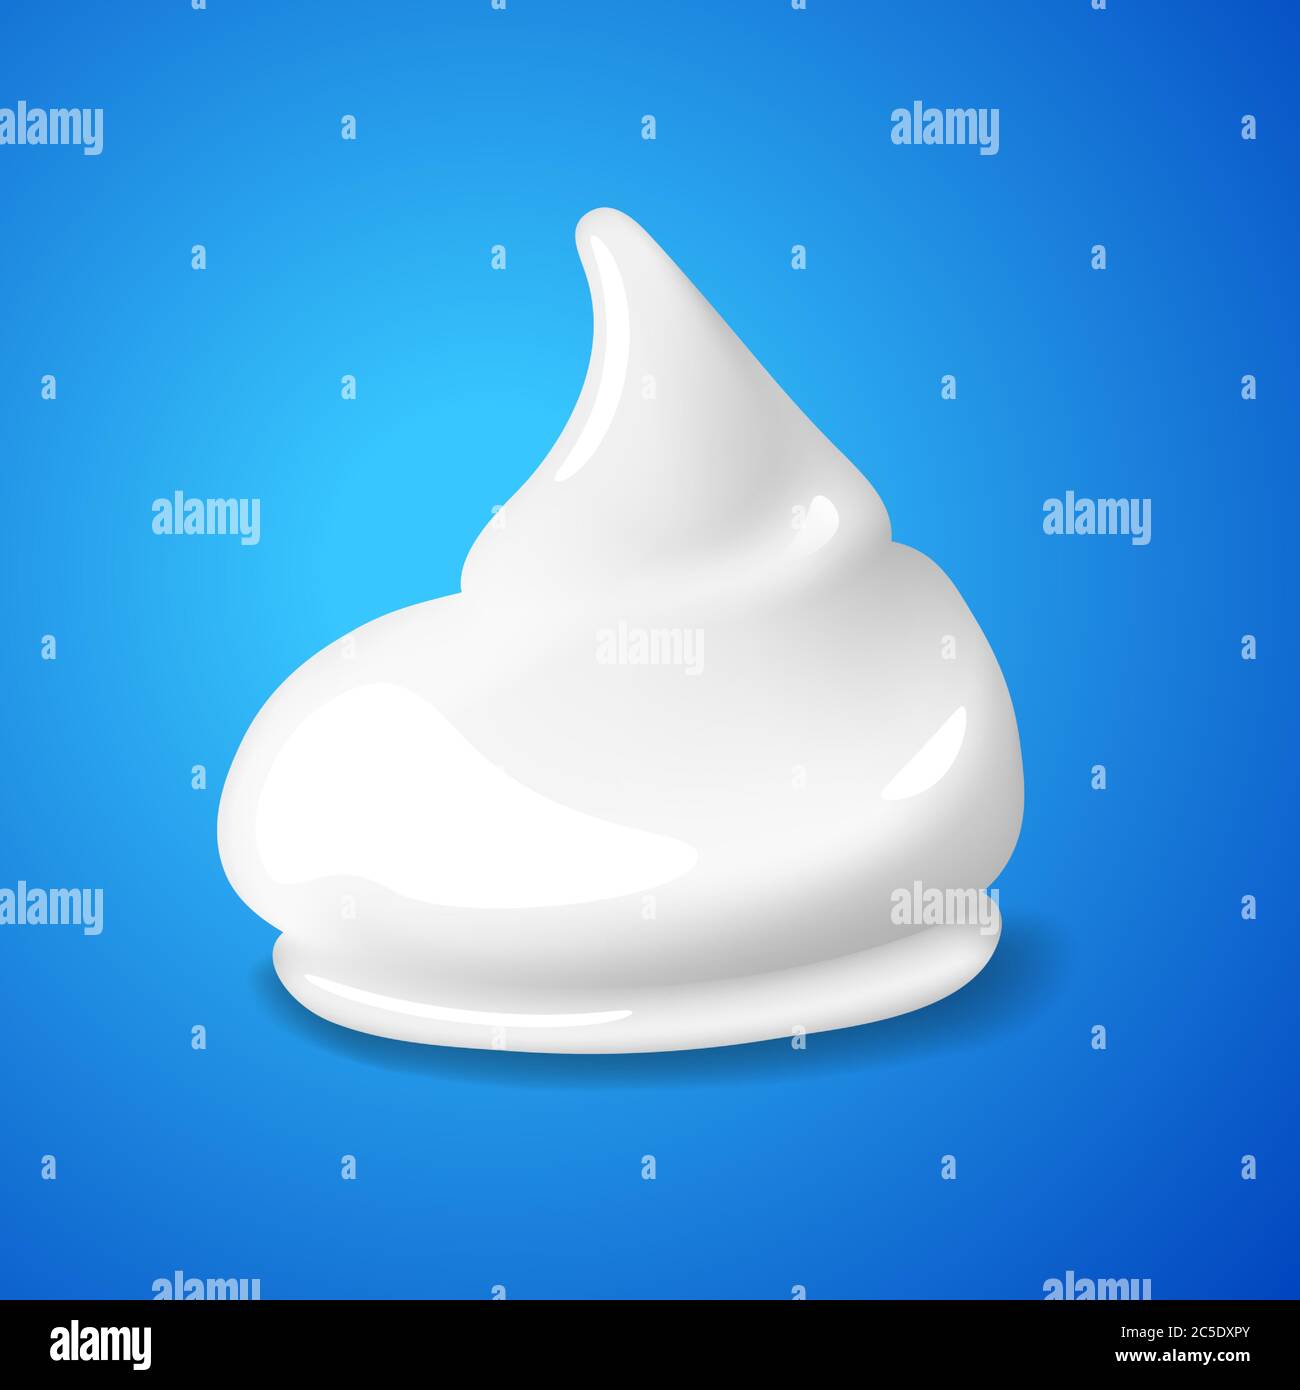 Realistic shaving gel or shaving foam cream soap mousse icon Vector realistic illustration isolated on blue background. Stock Vector